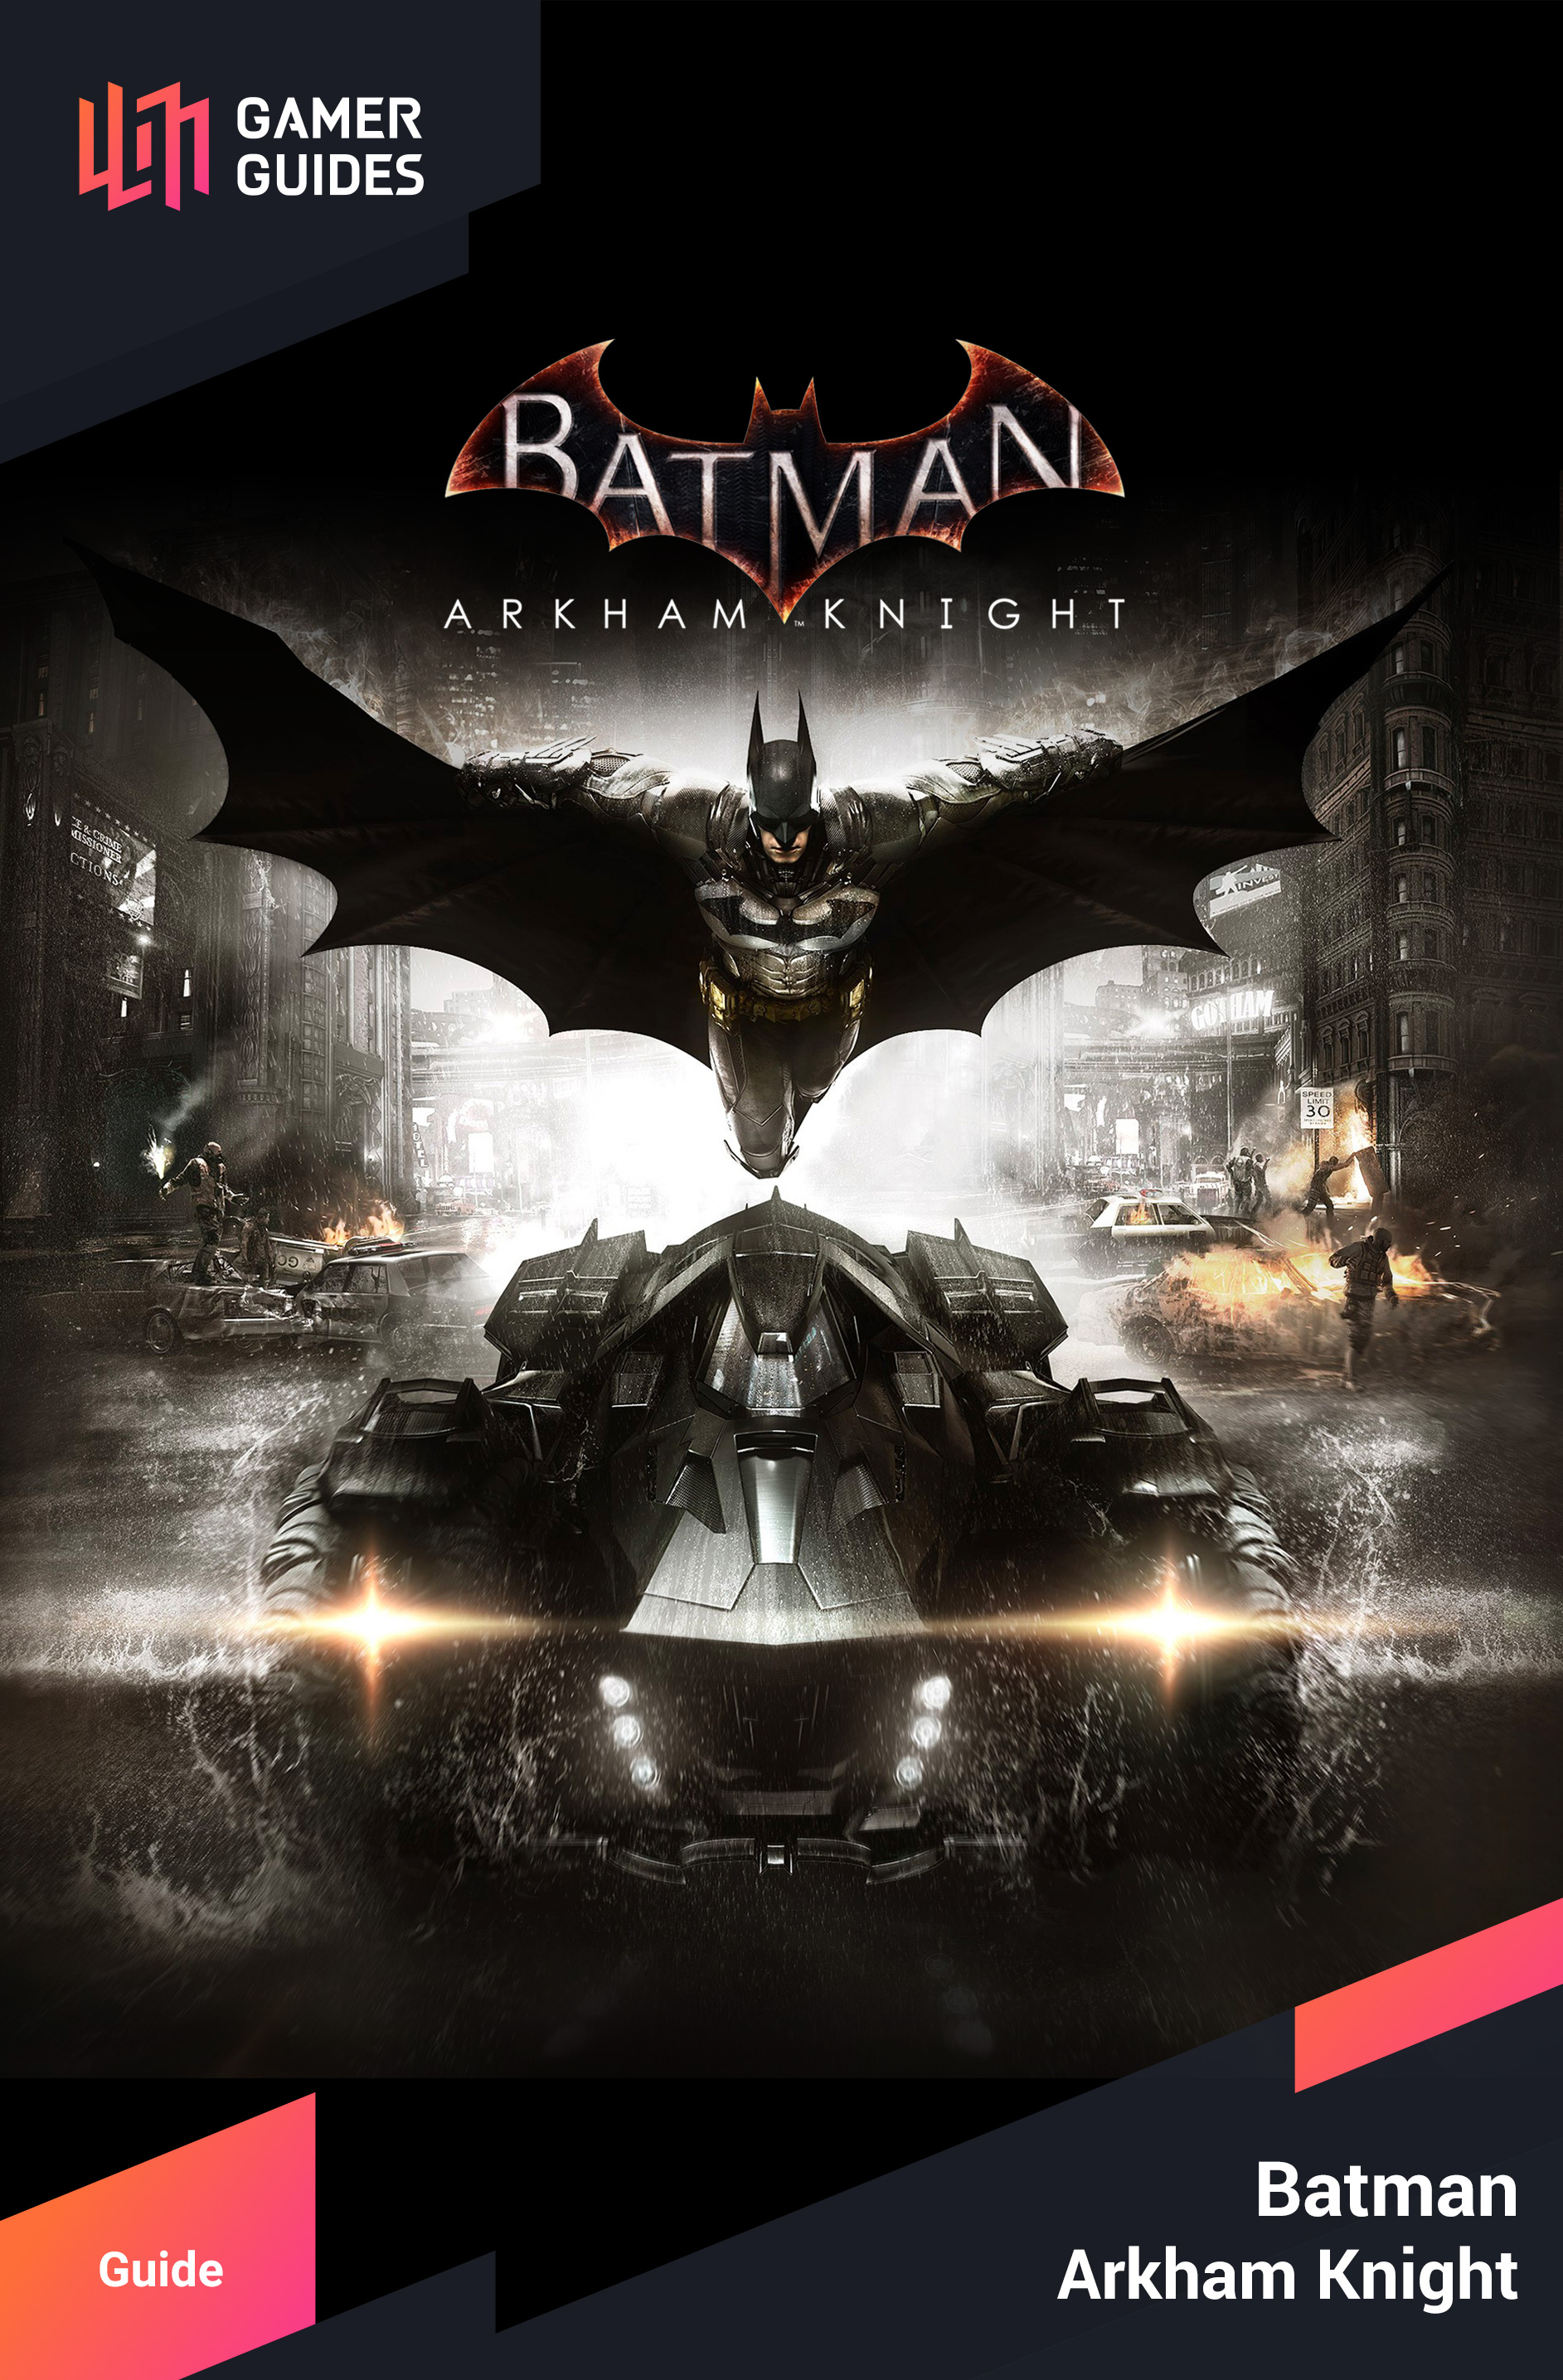 Batman arkham knight guide pdf download new bollywood romantic songs free download